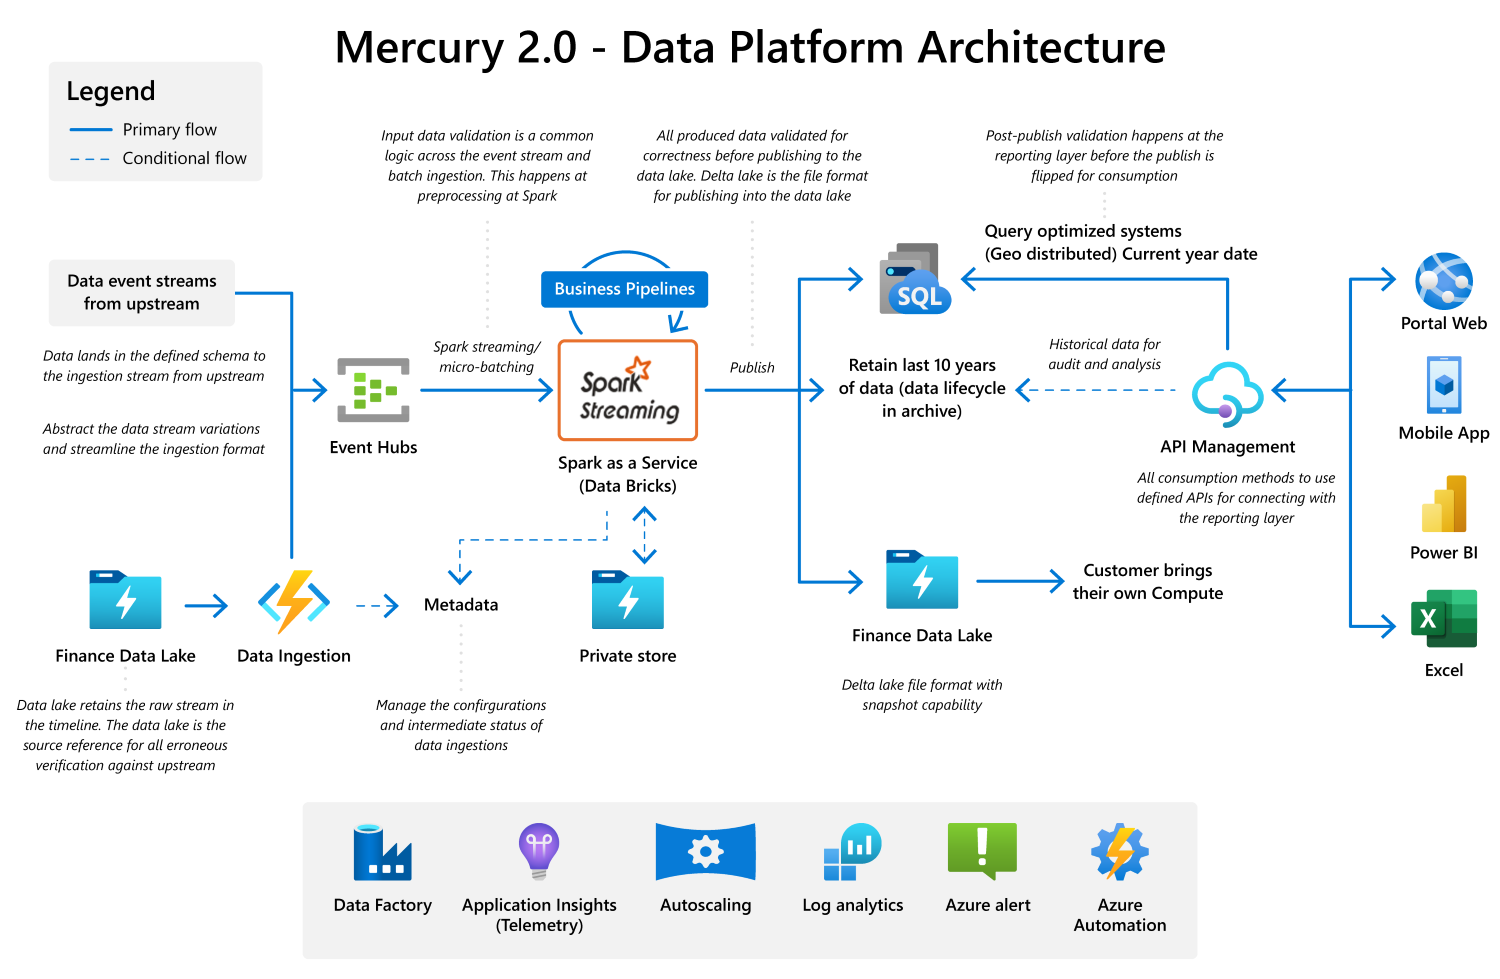 Key components of Mercury 2.0 include Microsoft Power BI and Excel on one side, the finance data lake on the other, and Spark in the middle, working as a data traffic cop.